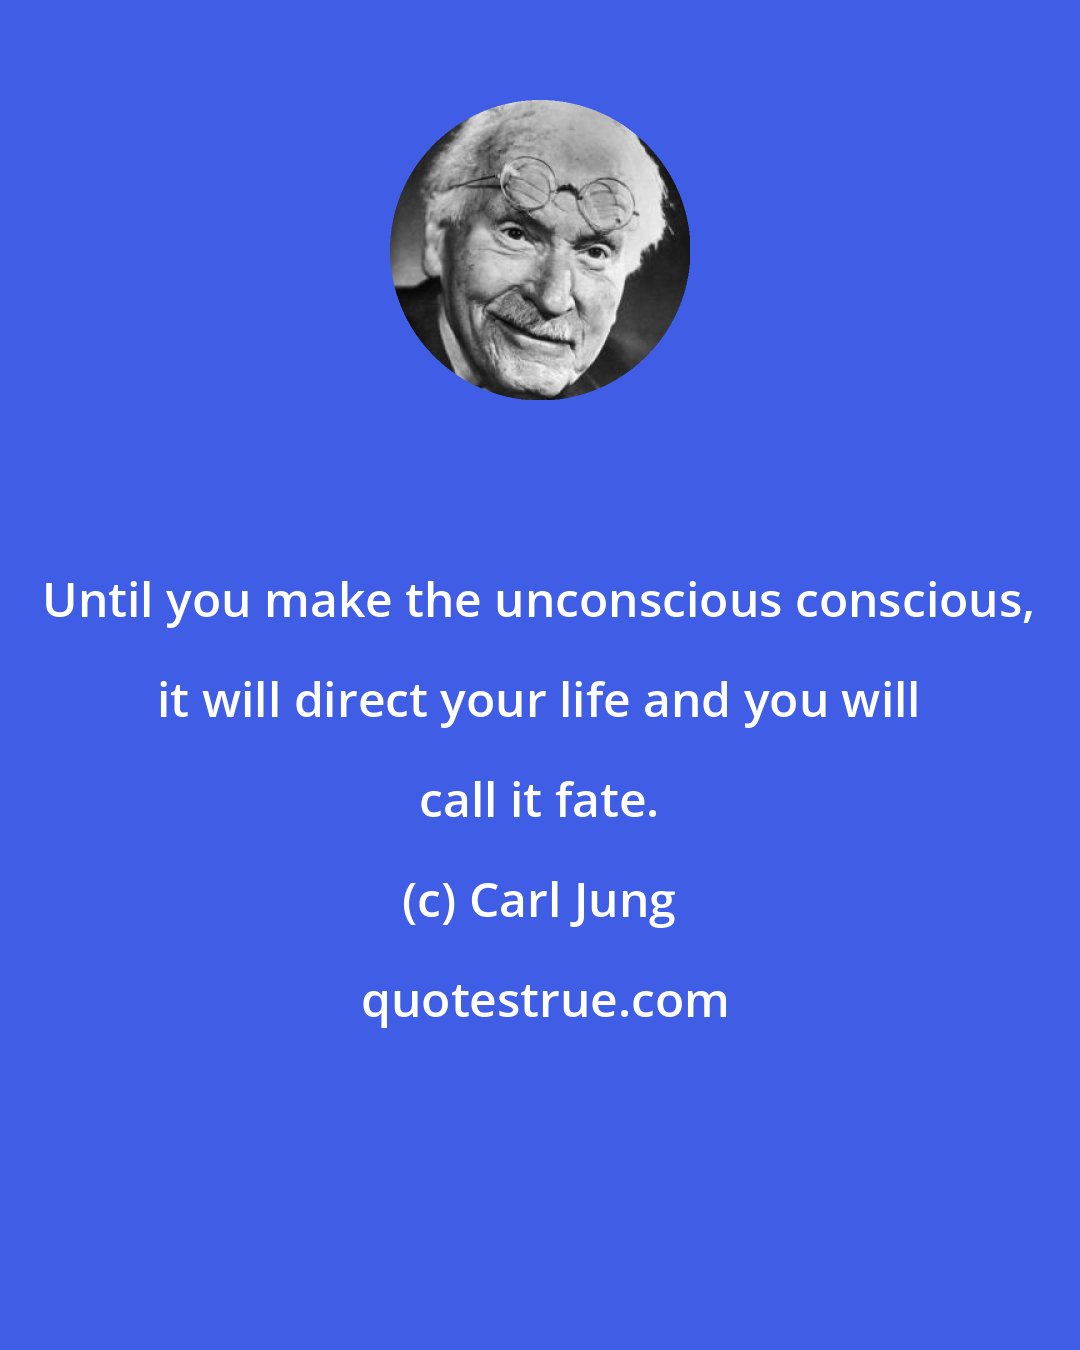 Carl Jung: Until you make the unconscious conscious, it will direct your life and you will call it fate.